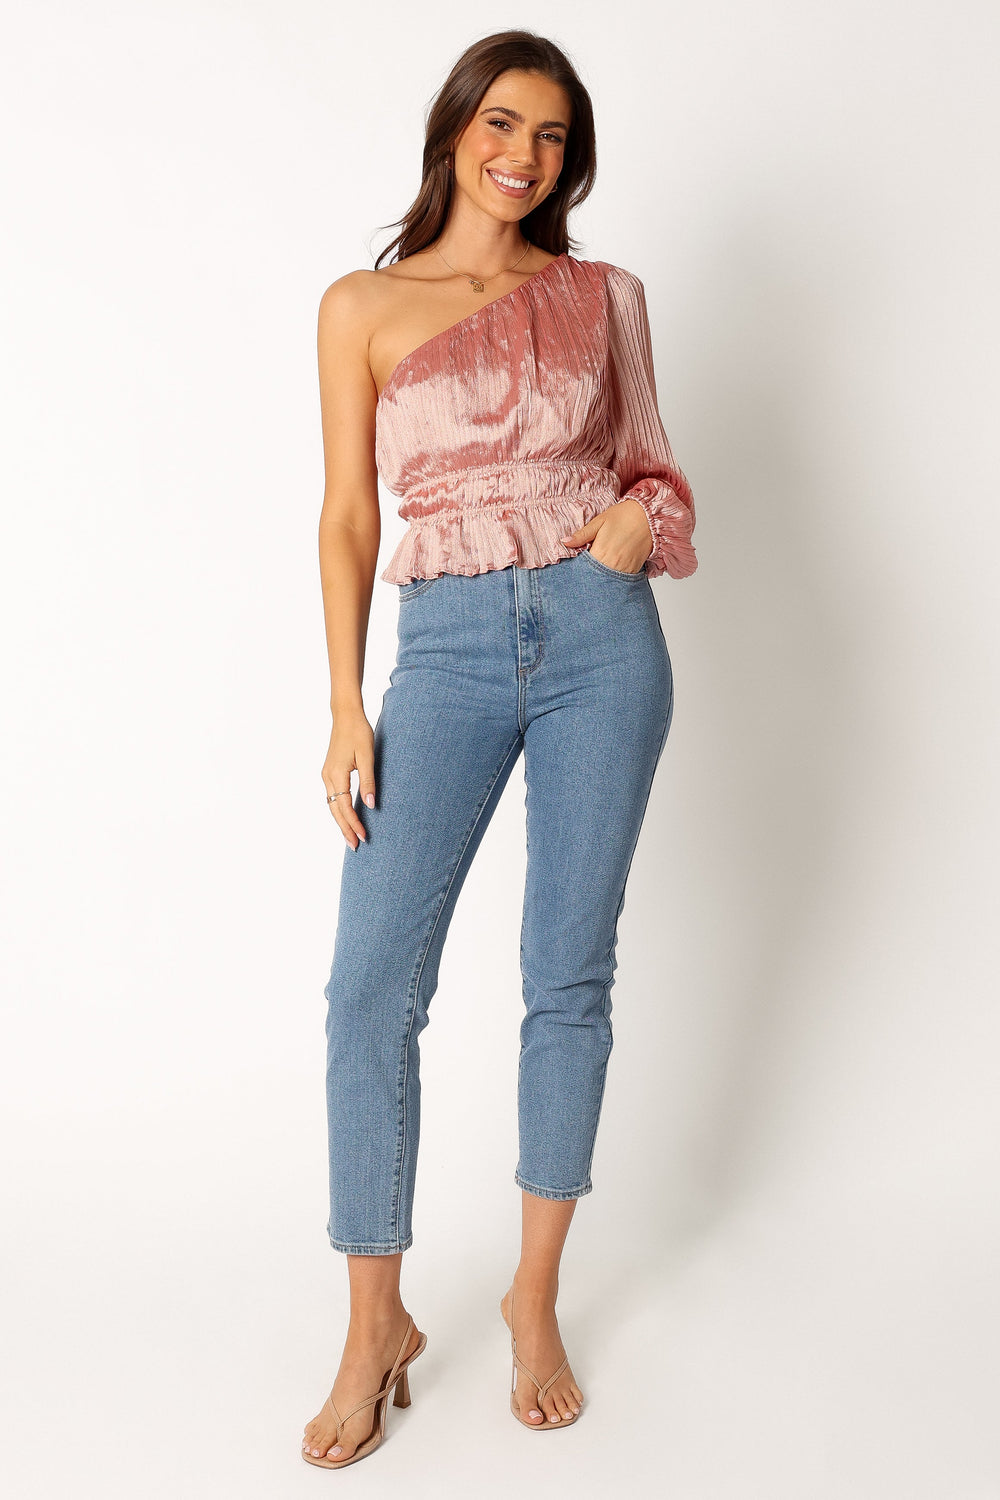 Petal and Pup USA TOPS Aria One Sleeve Top - Pink